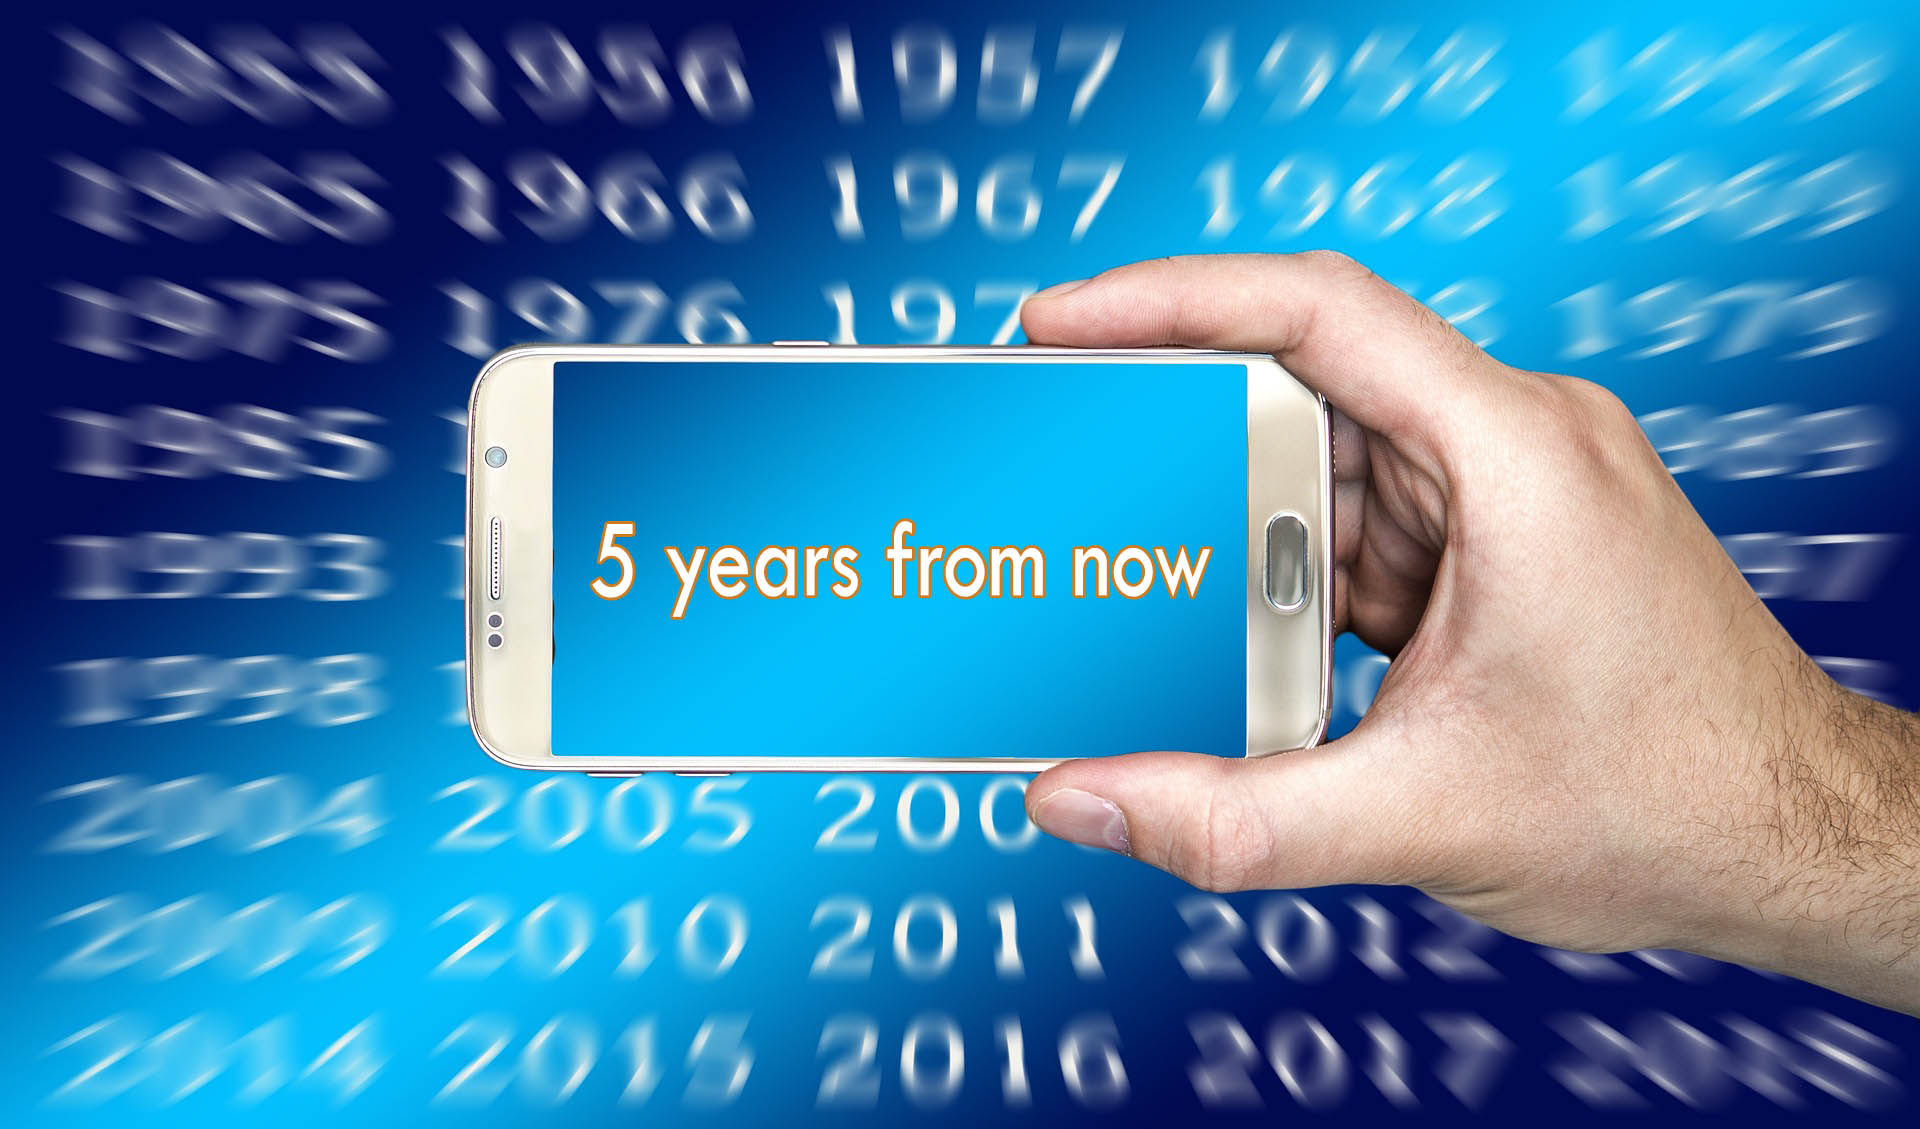 hand holding cellphone with words "5 years from now" on screen, year dates in background